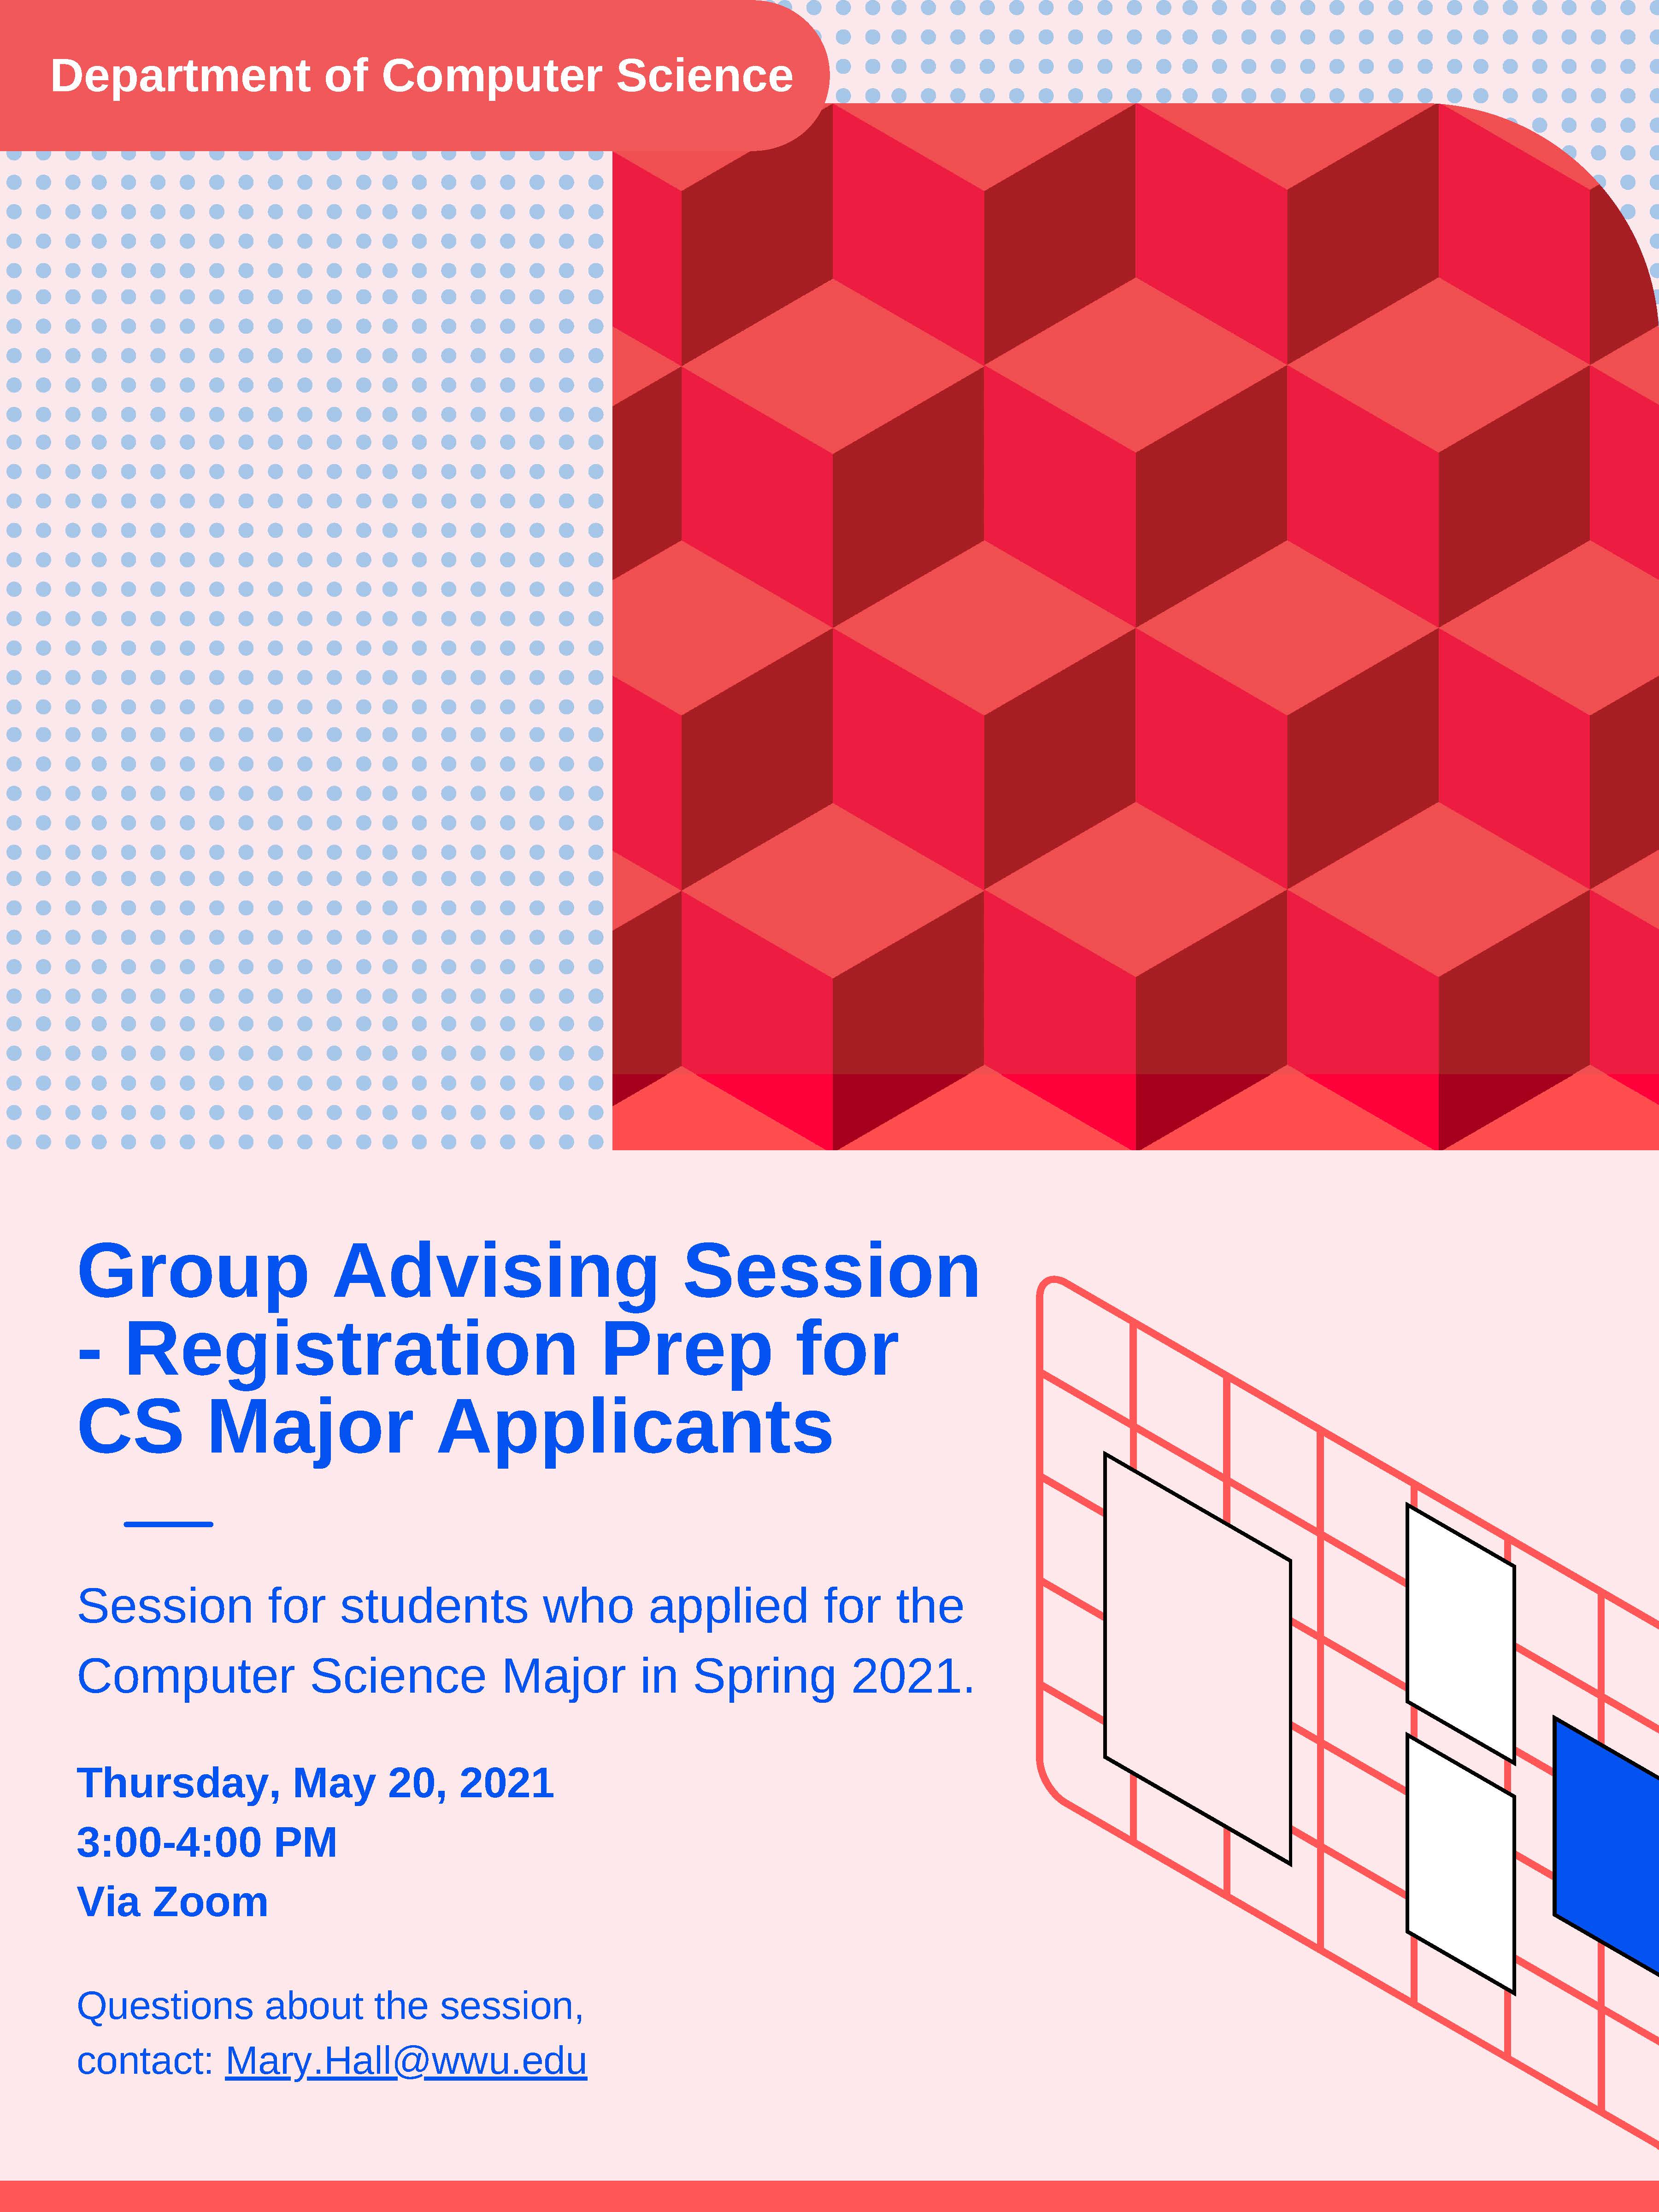 Group Advising Session Poster